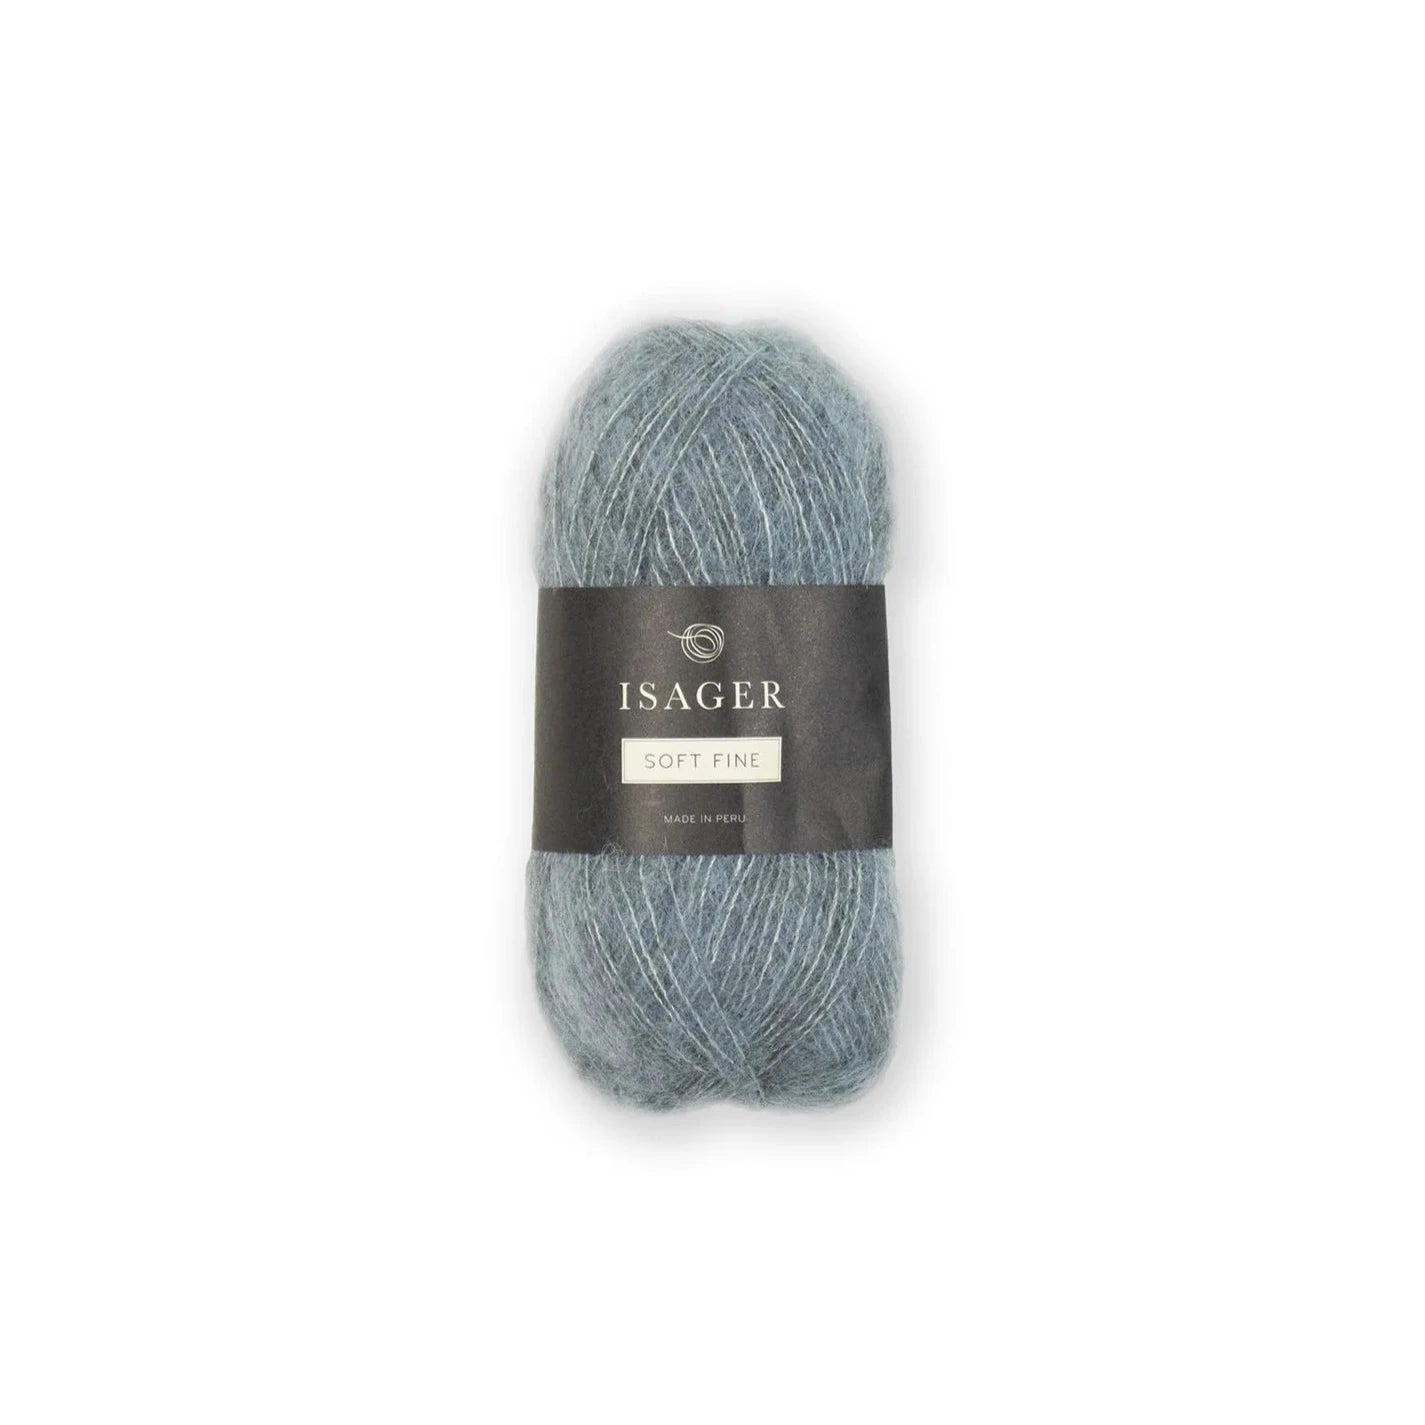 Isager Soft Fine - Isager - 11 - The Little Yarn Store